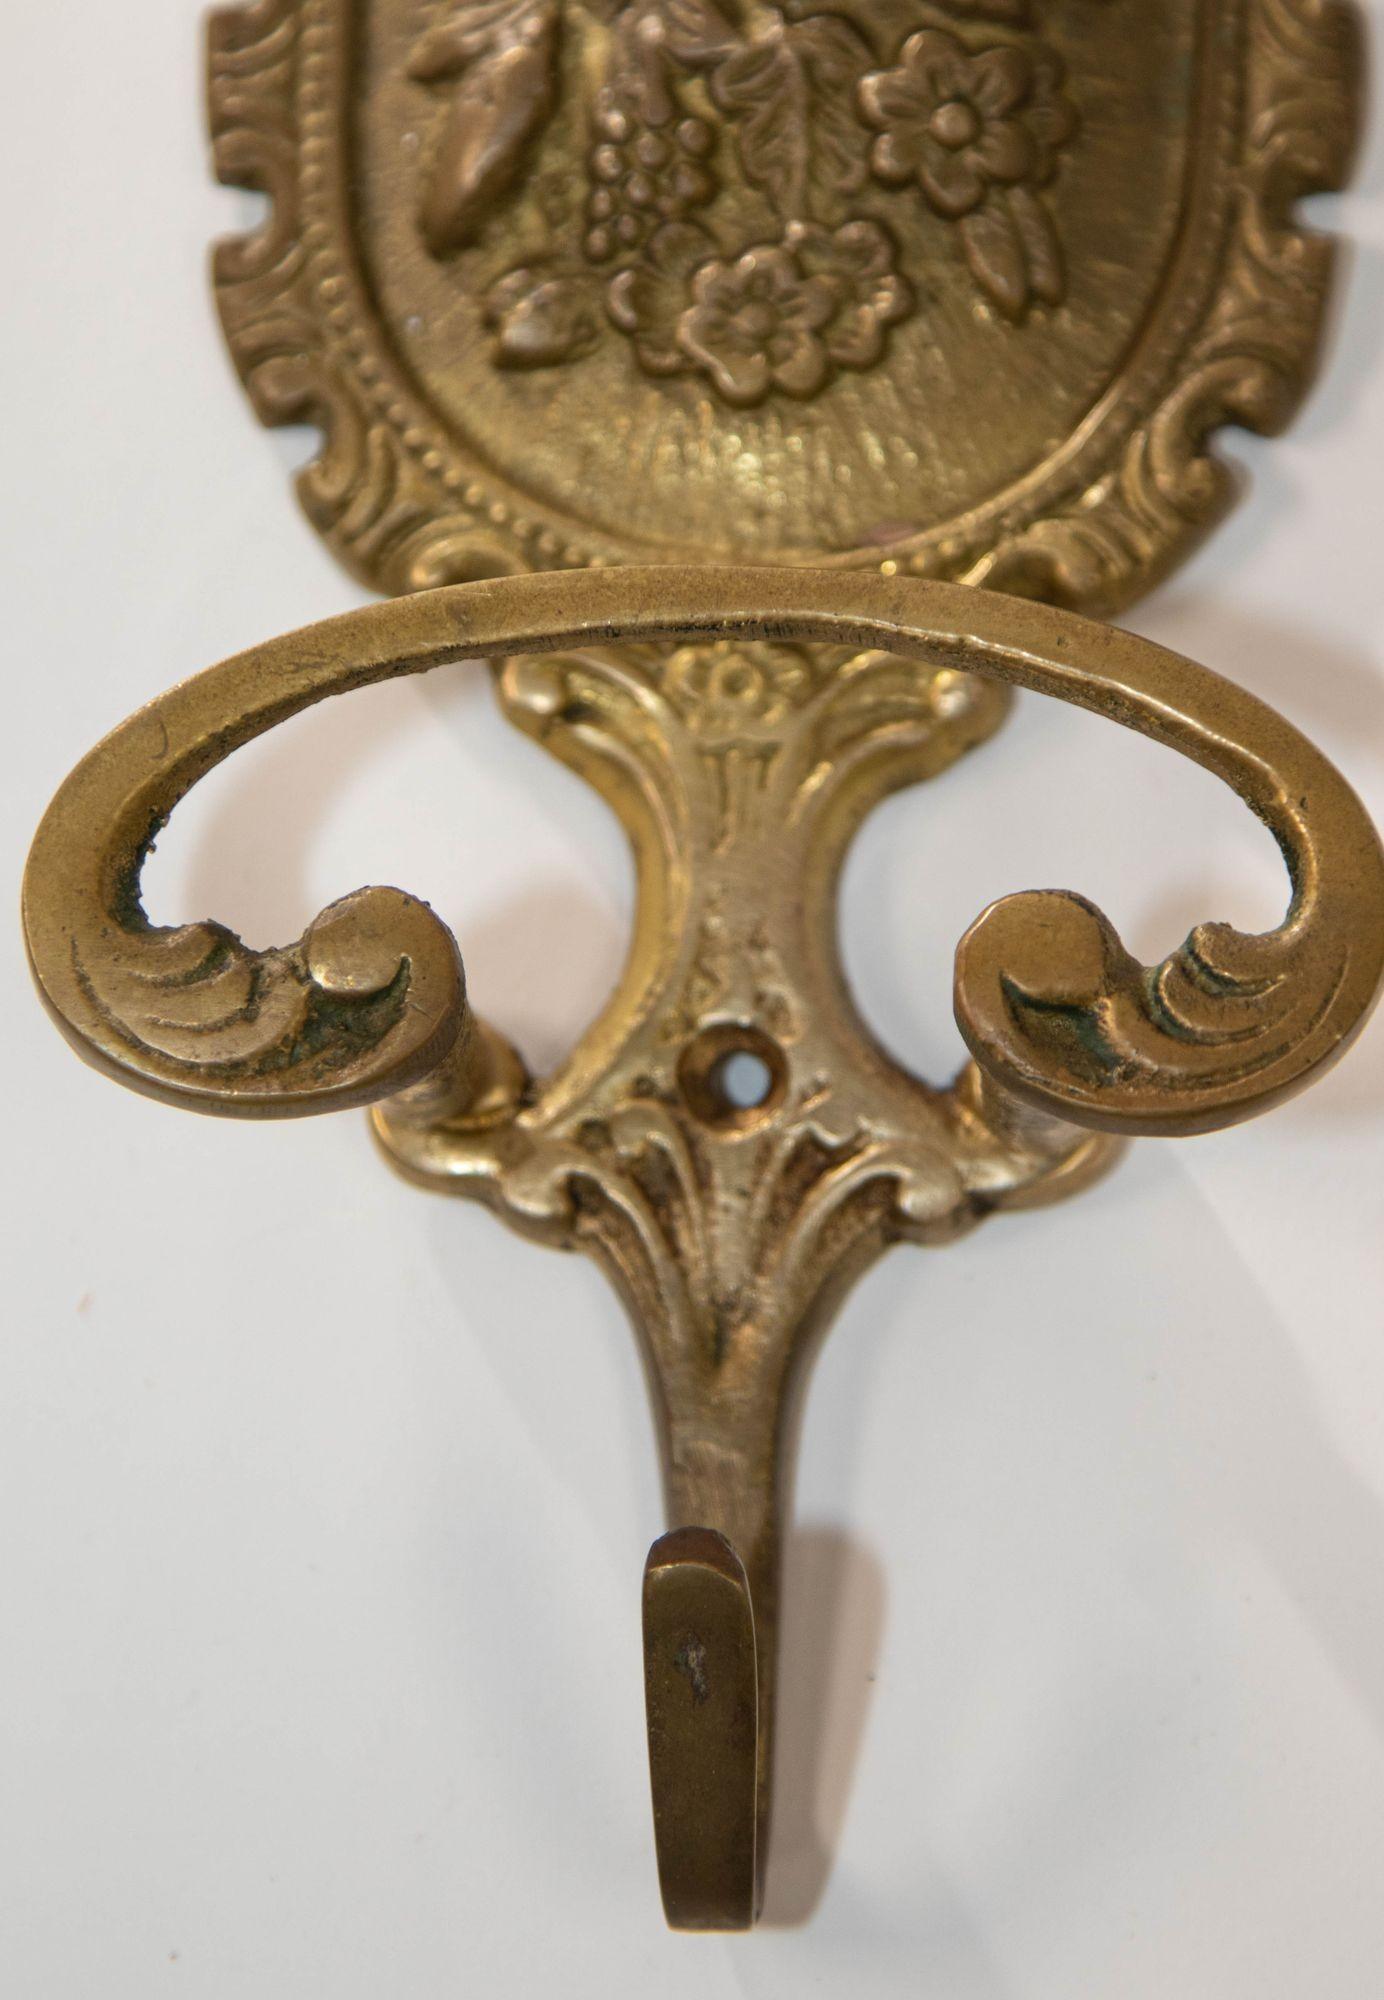 Victorian Architectural Italian Cast Brass Floral Wall Hook Decor Made in Italy